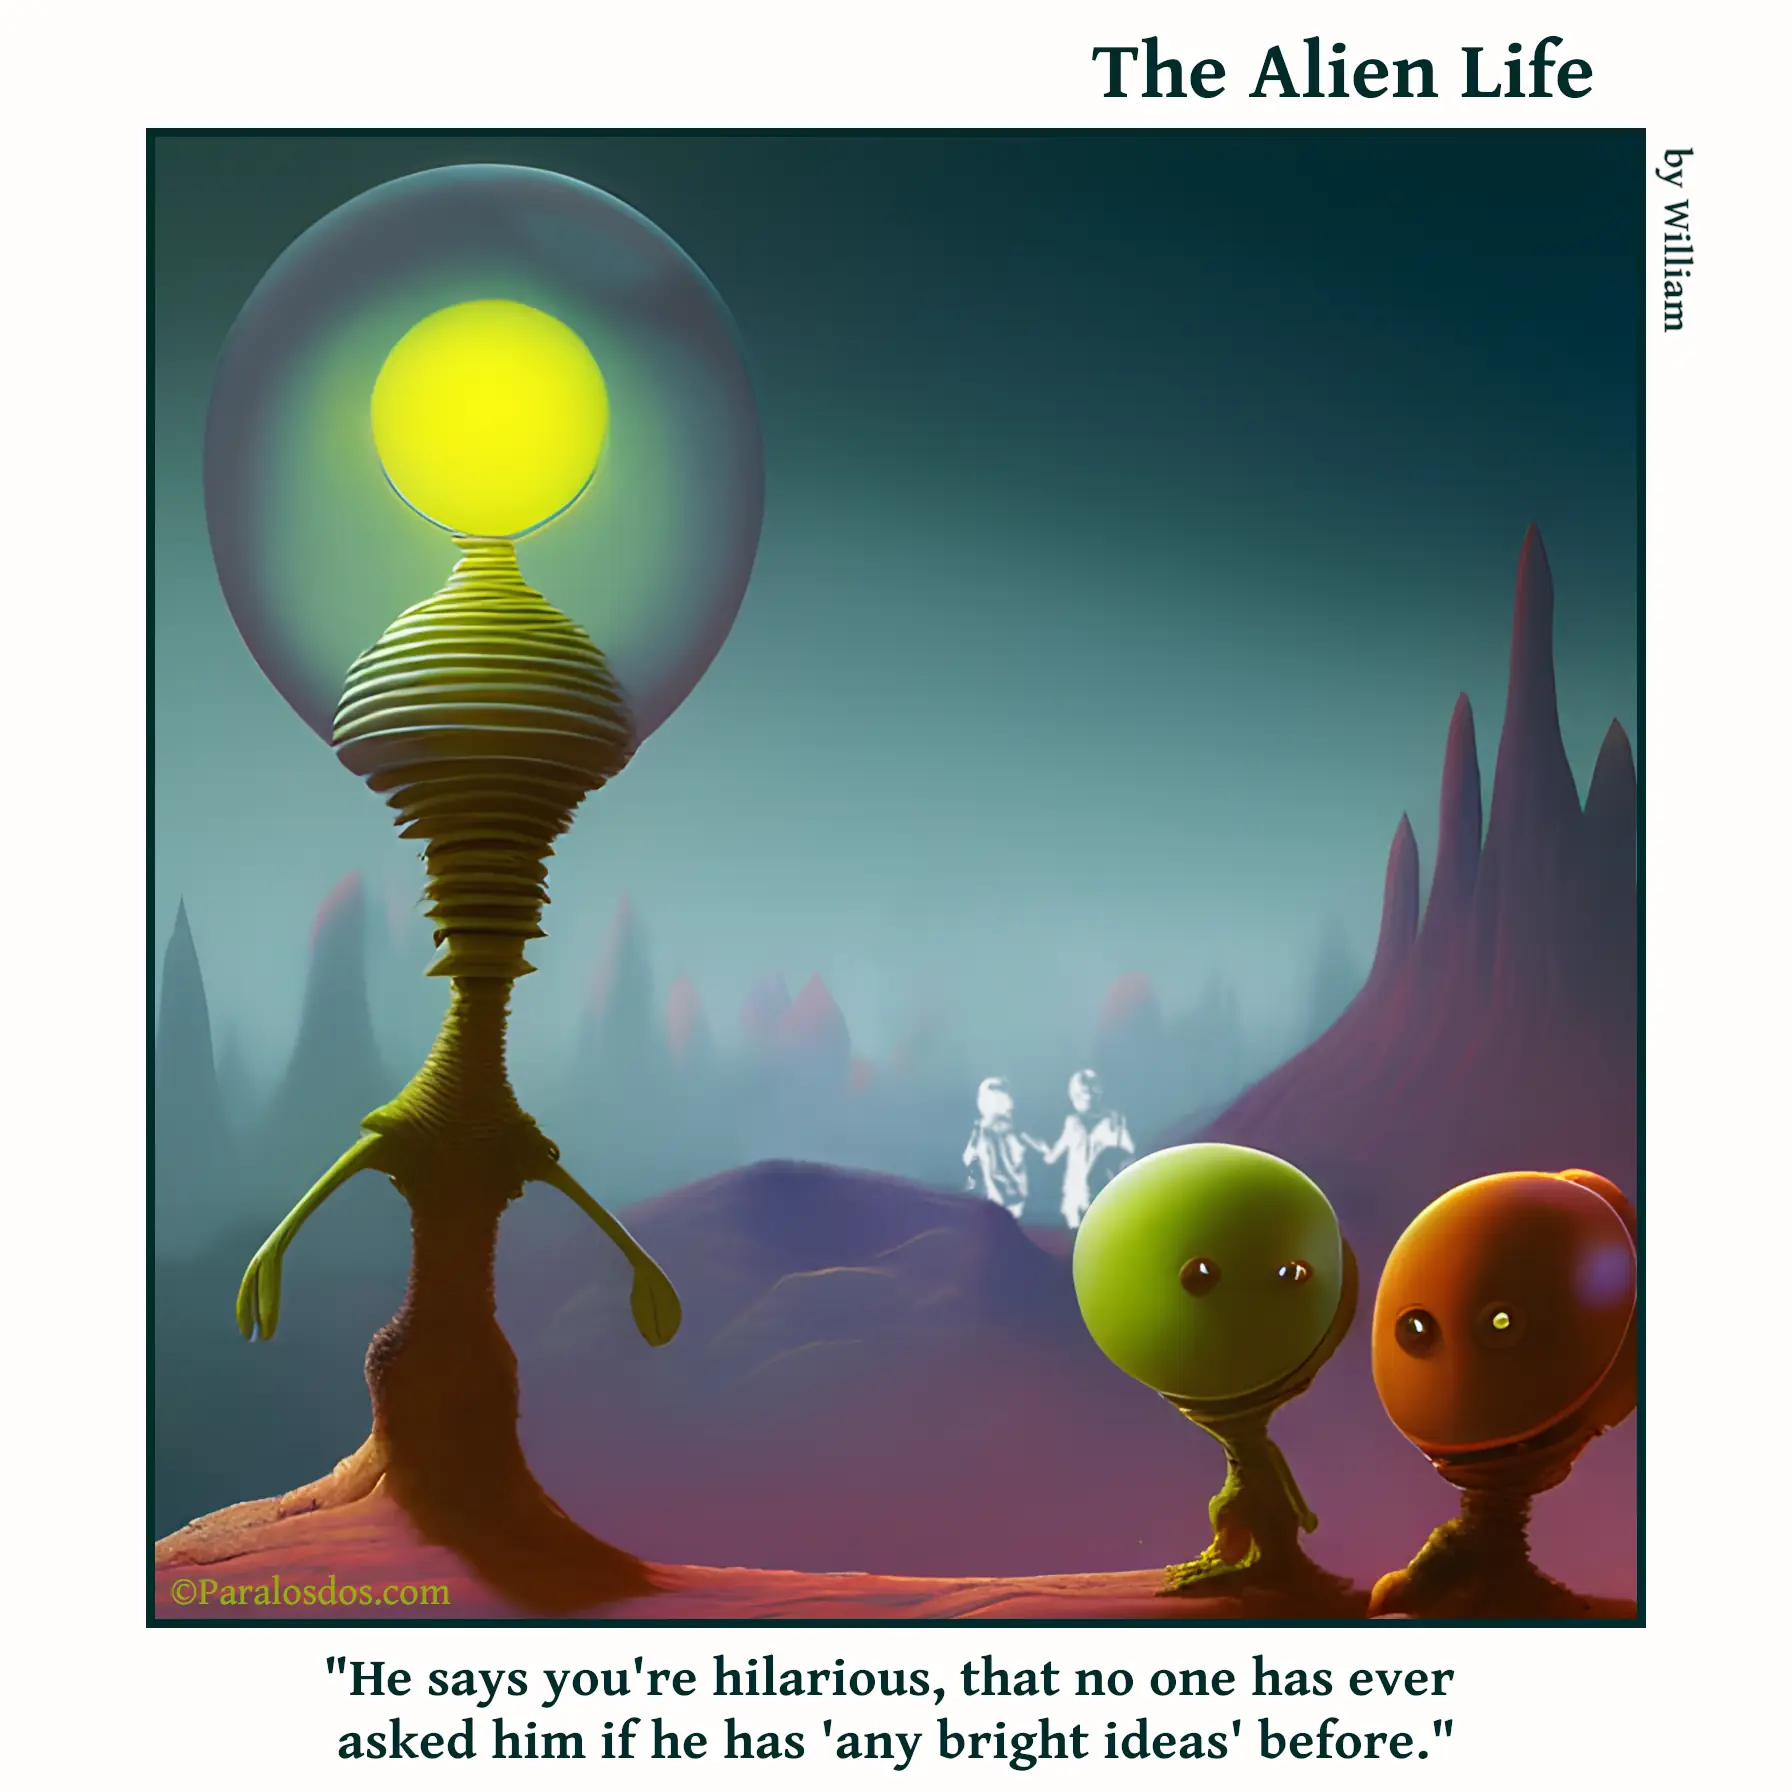 The Alien Life, one panel Comic. Two small aliens are standing to the right of a tall alien who has a head like a light bulb. The caption reads: "He says you're hilarious, that no one has ever asked him if he has 'any bright ideas' before."